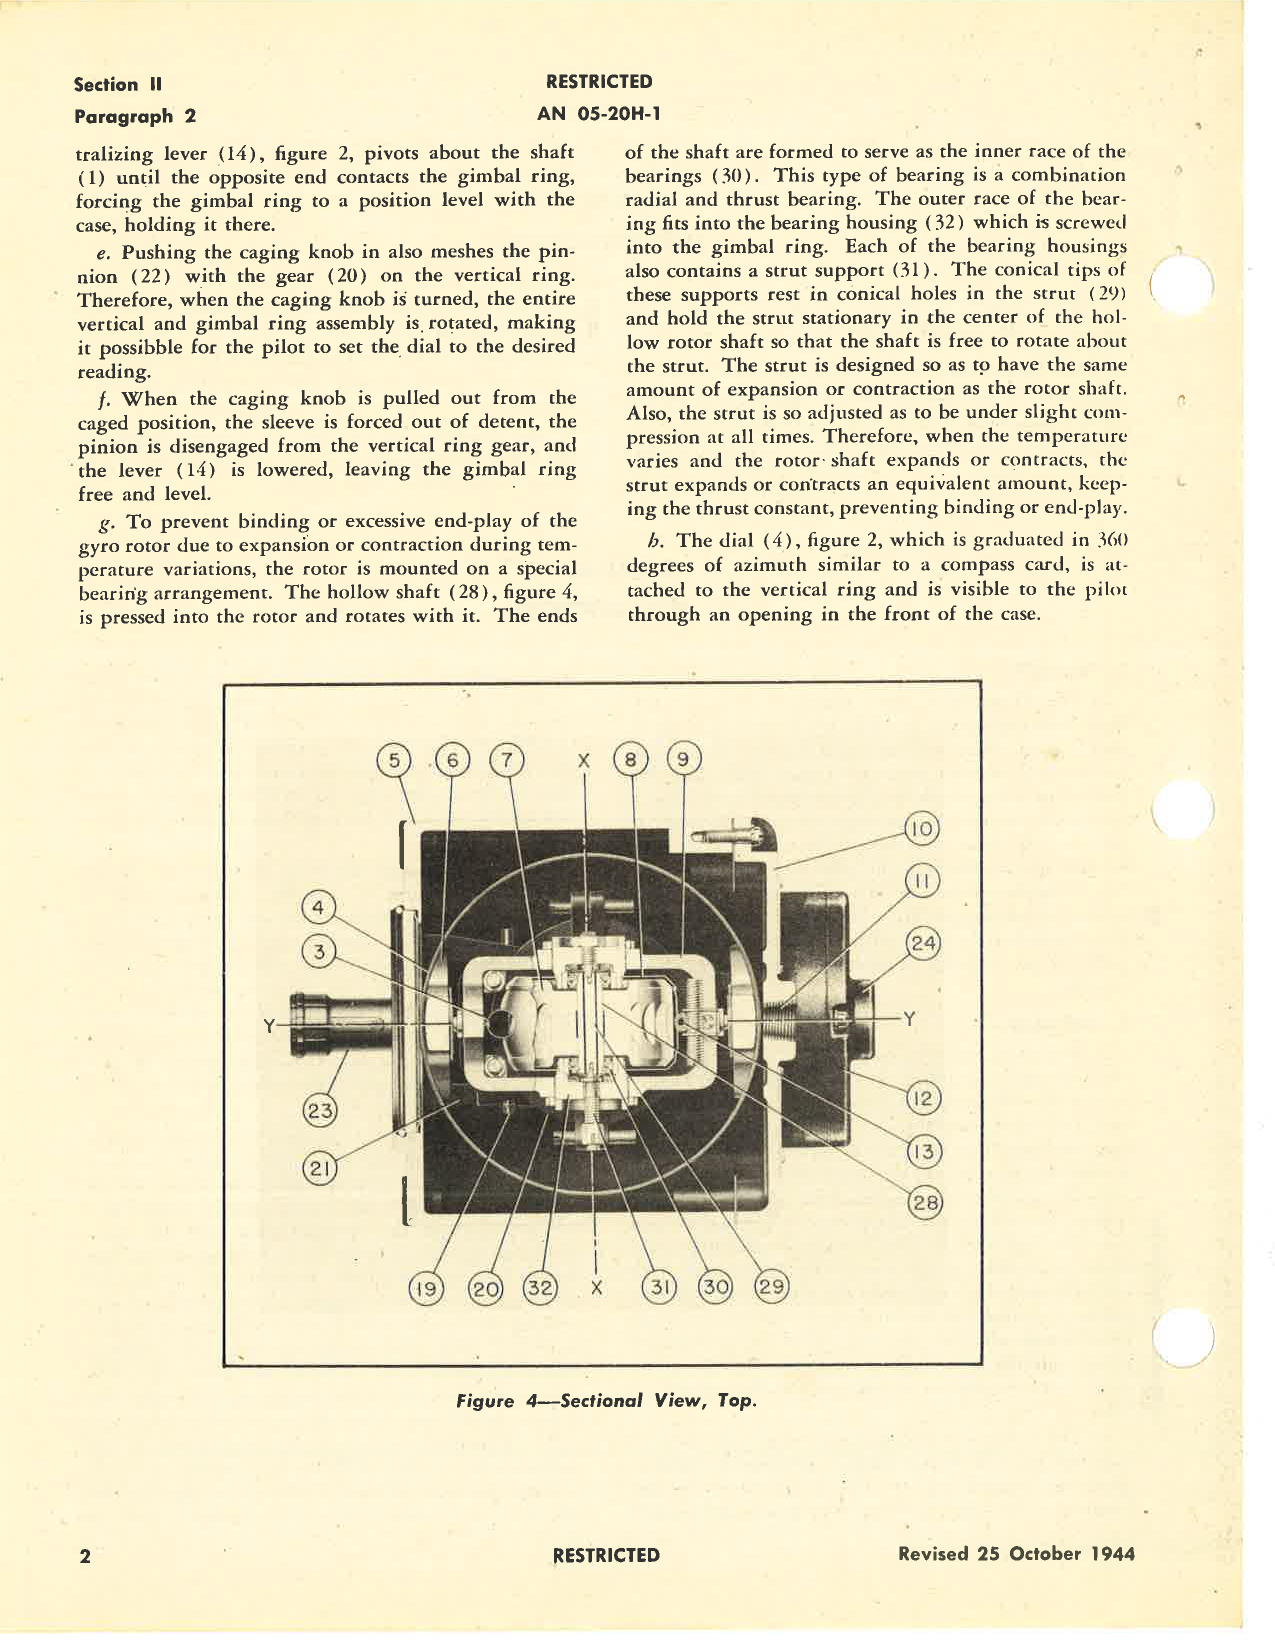 Sample page 6 from AirCorps Library document: Operation and Service Instructions for Directional Gyro Indicators Type AN 5735-1